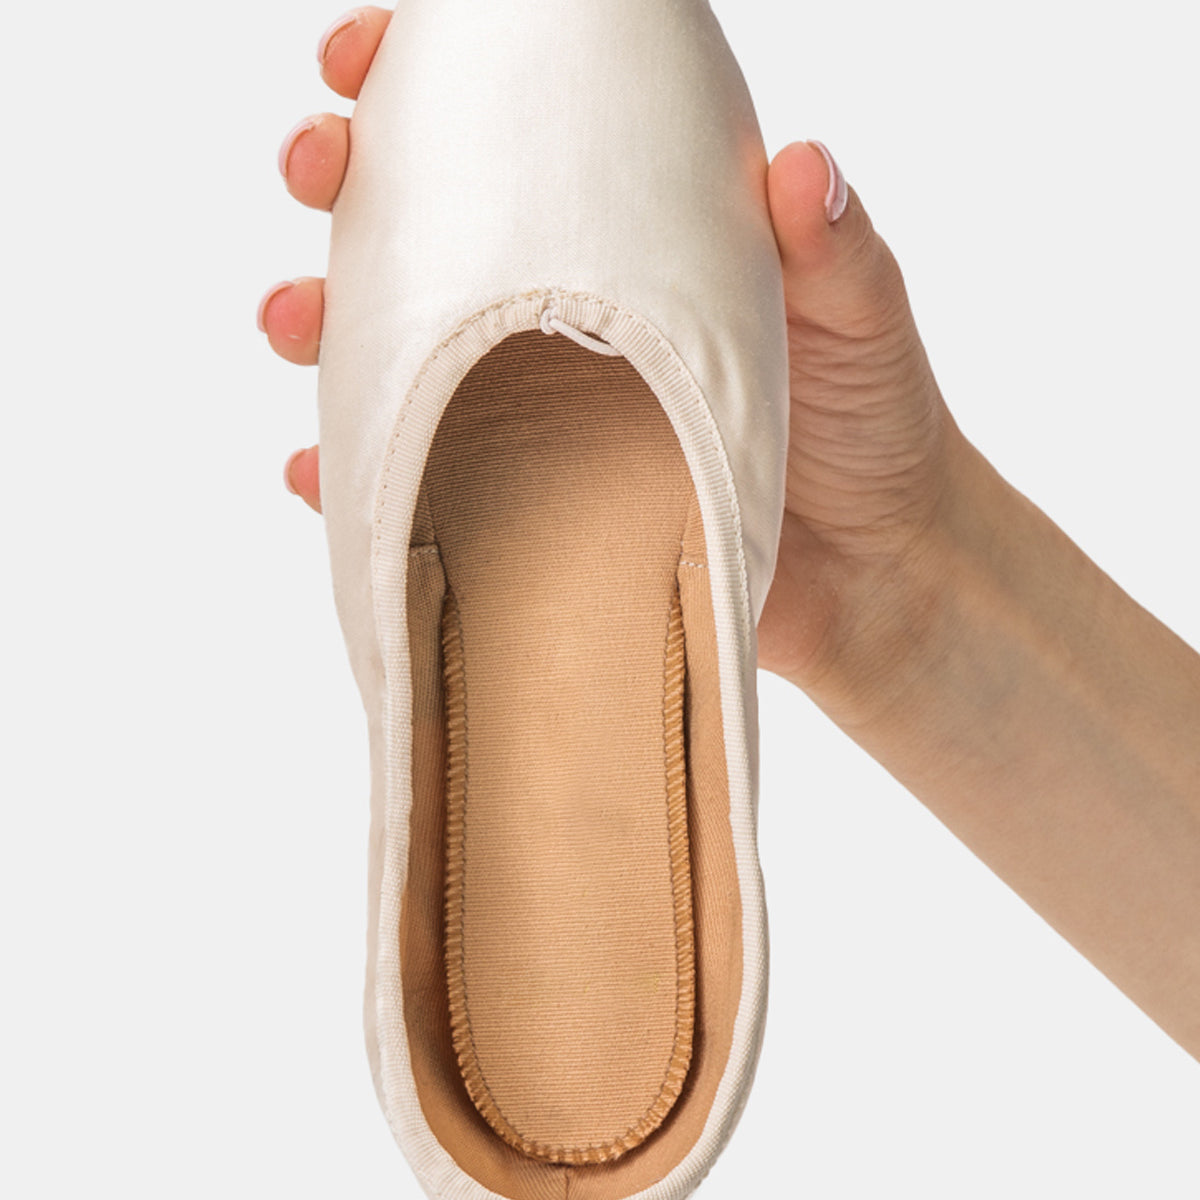 10 BURNING QUESTIONS ABOUT POINTE SHOES